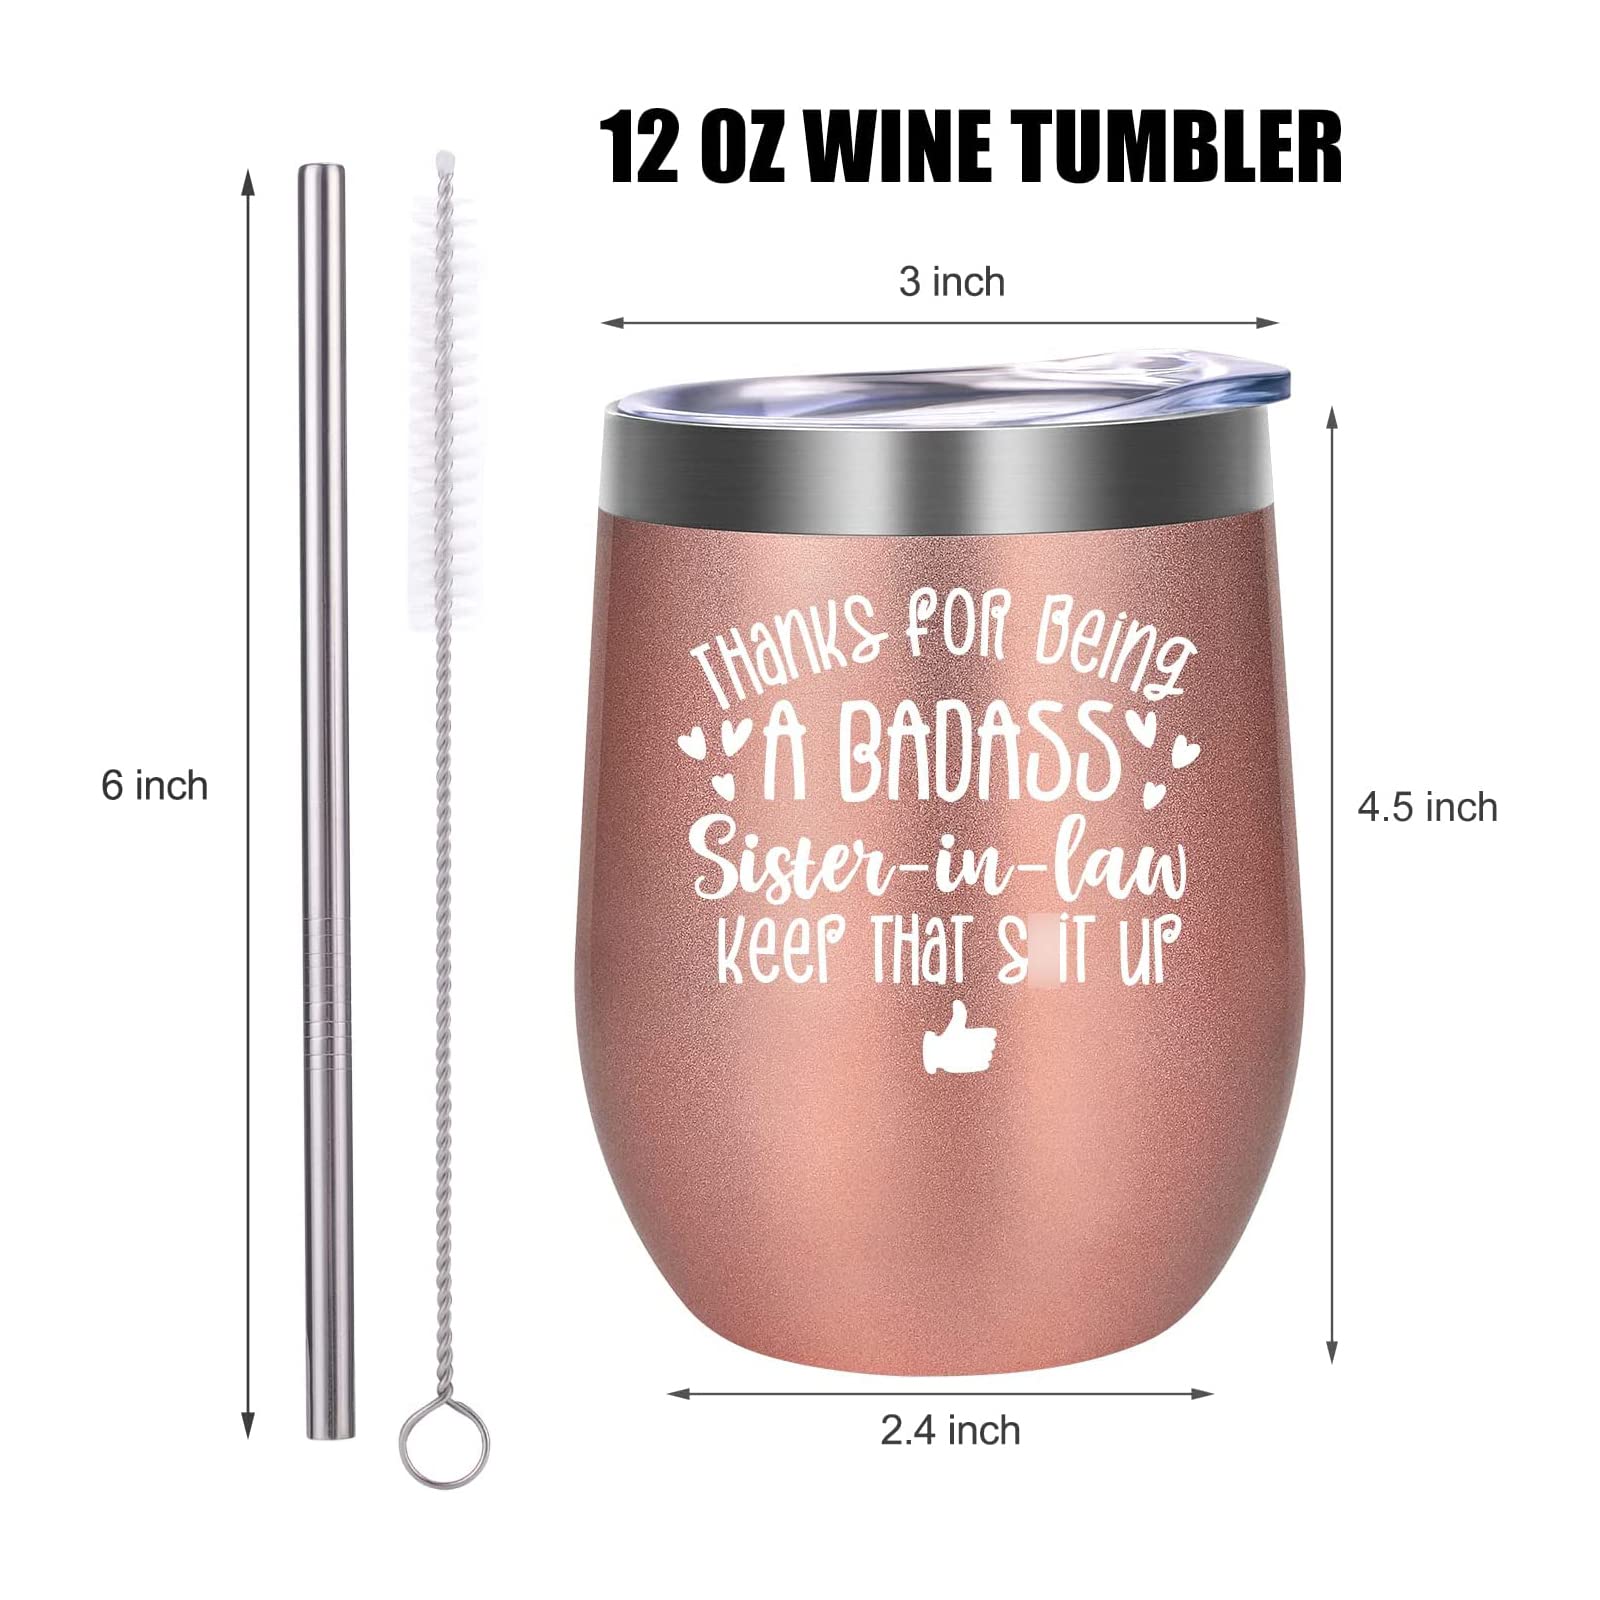 Fairy's Gift Wine Tumbler, Sister in Law Gifts, Gifts for Sister in Law, Sister in Law Birthday Gifts Ideas - Mothers Day, Birthday Gifts for Best Sister in Law, Badass Sister in Law Gifts for Women